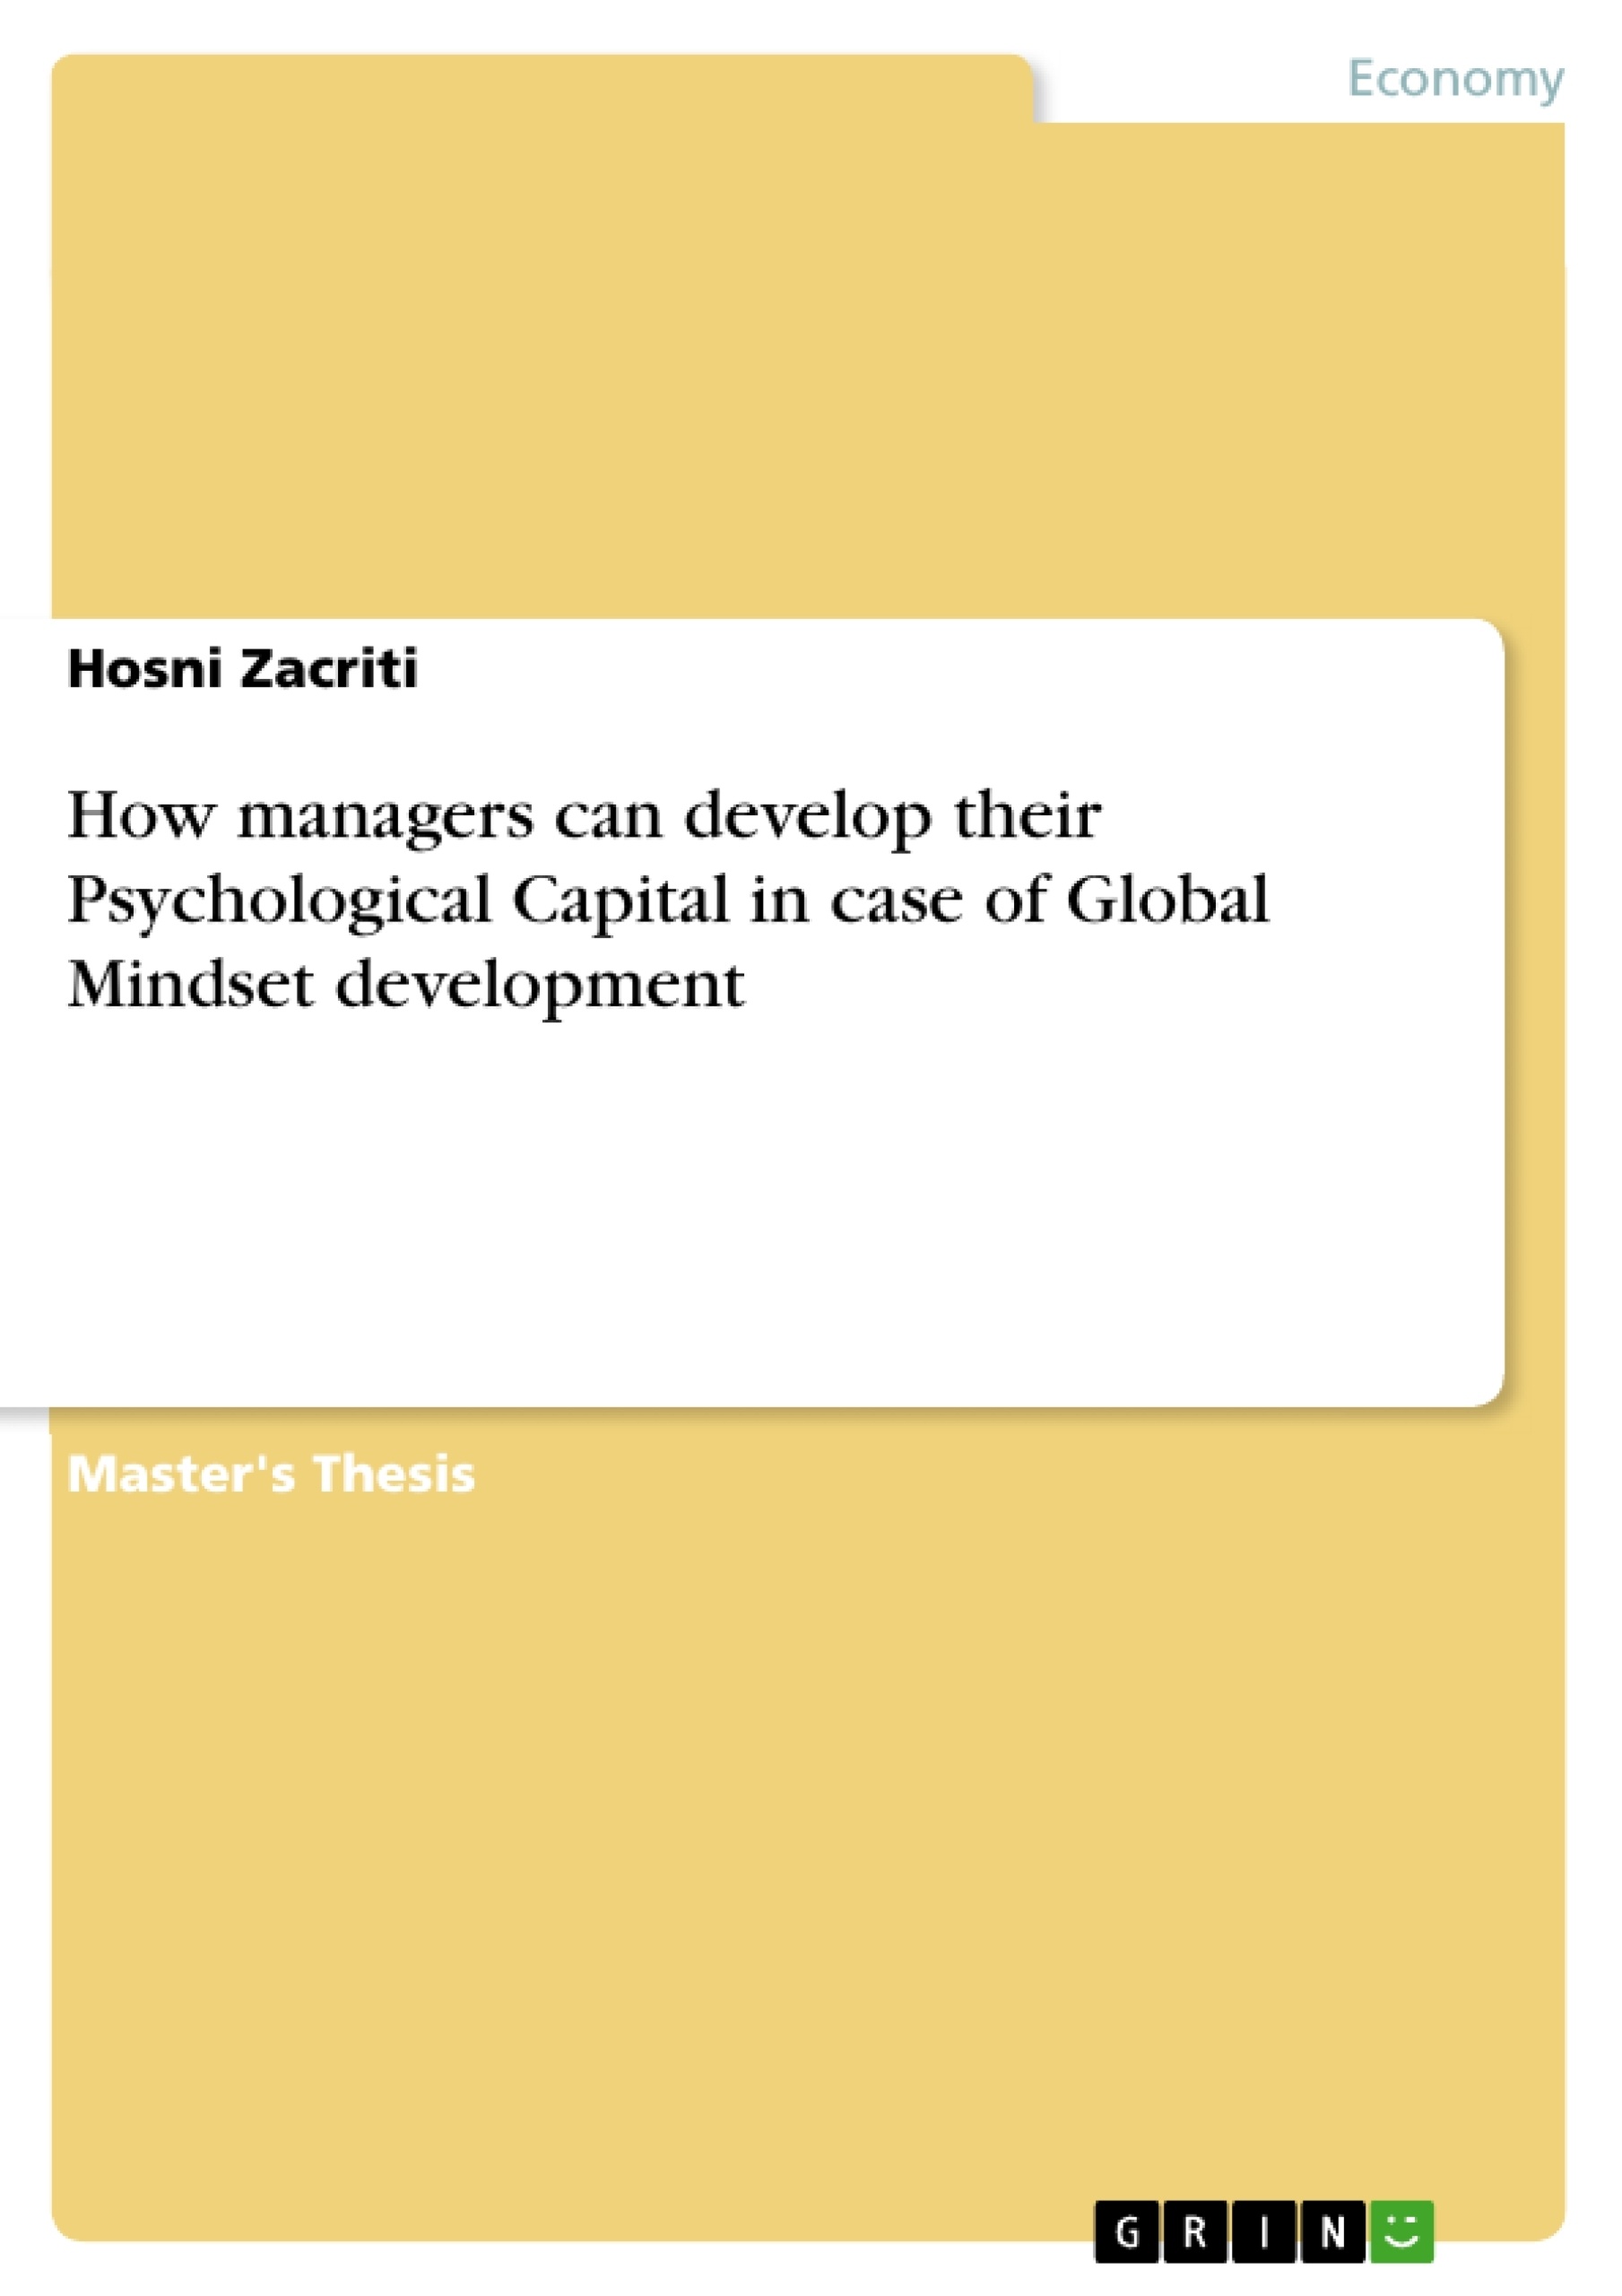 Título: How managers can develop their Psychological Capital in case of Global Mindset development